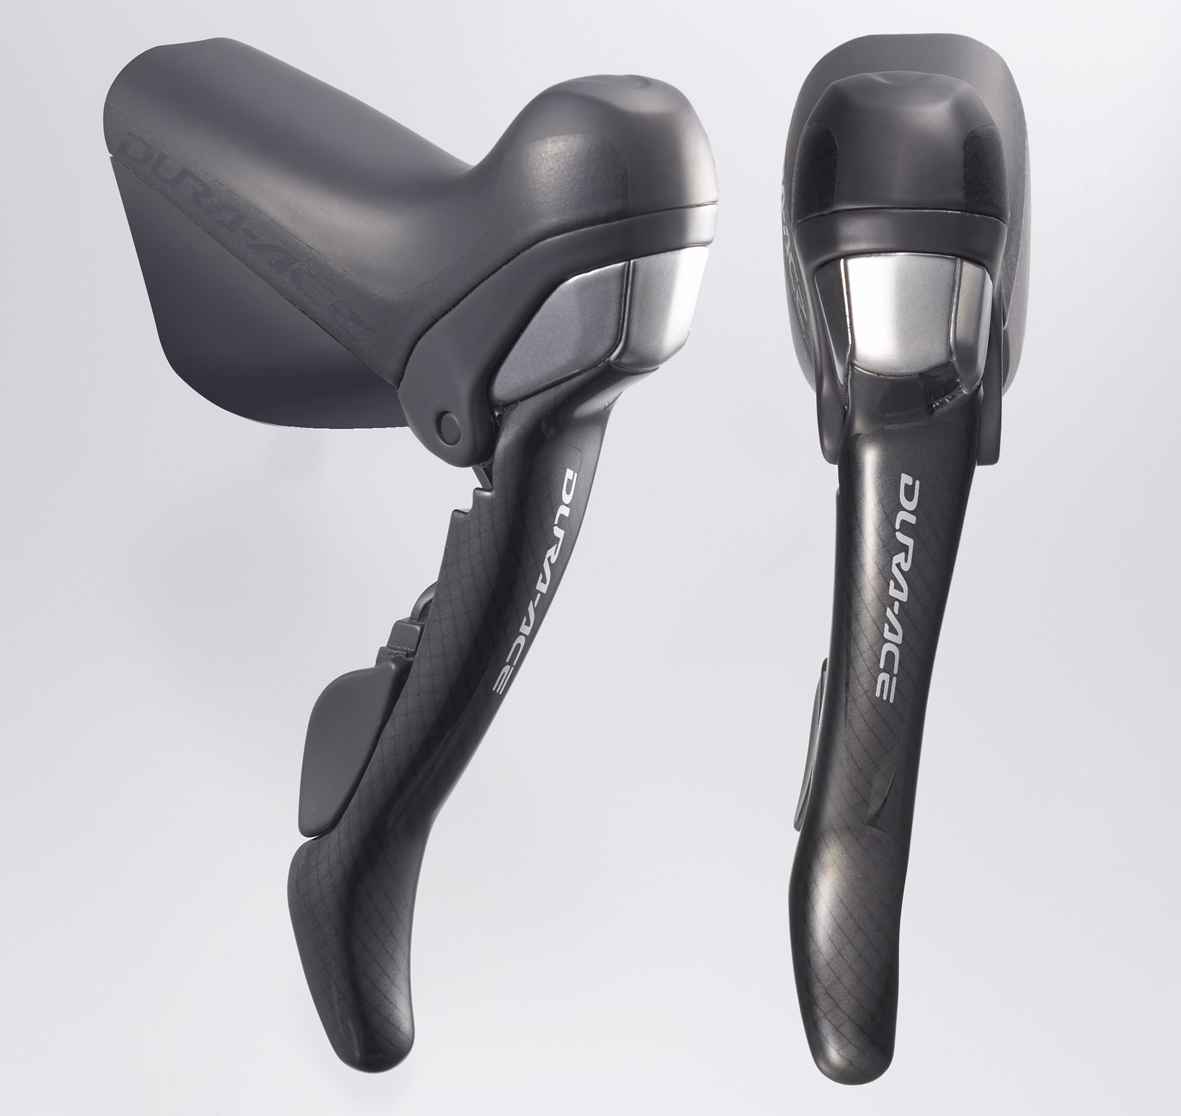 Shimano 7900 DURA-ACE Double 10-SPEED Road Sti Levers - £332.99